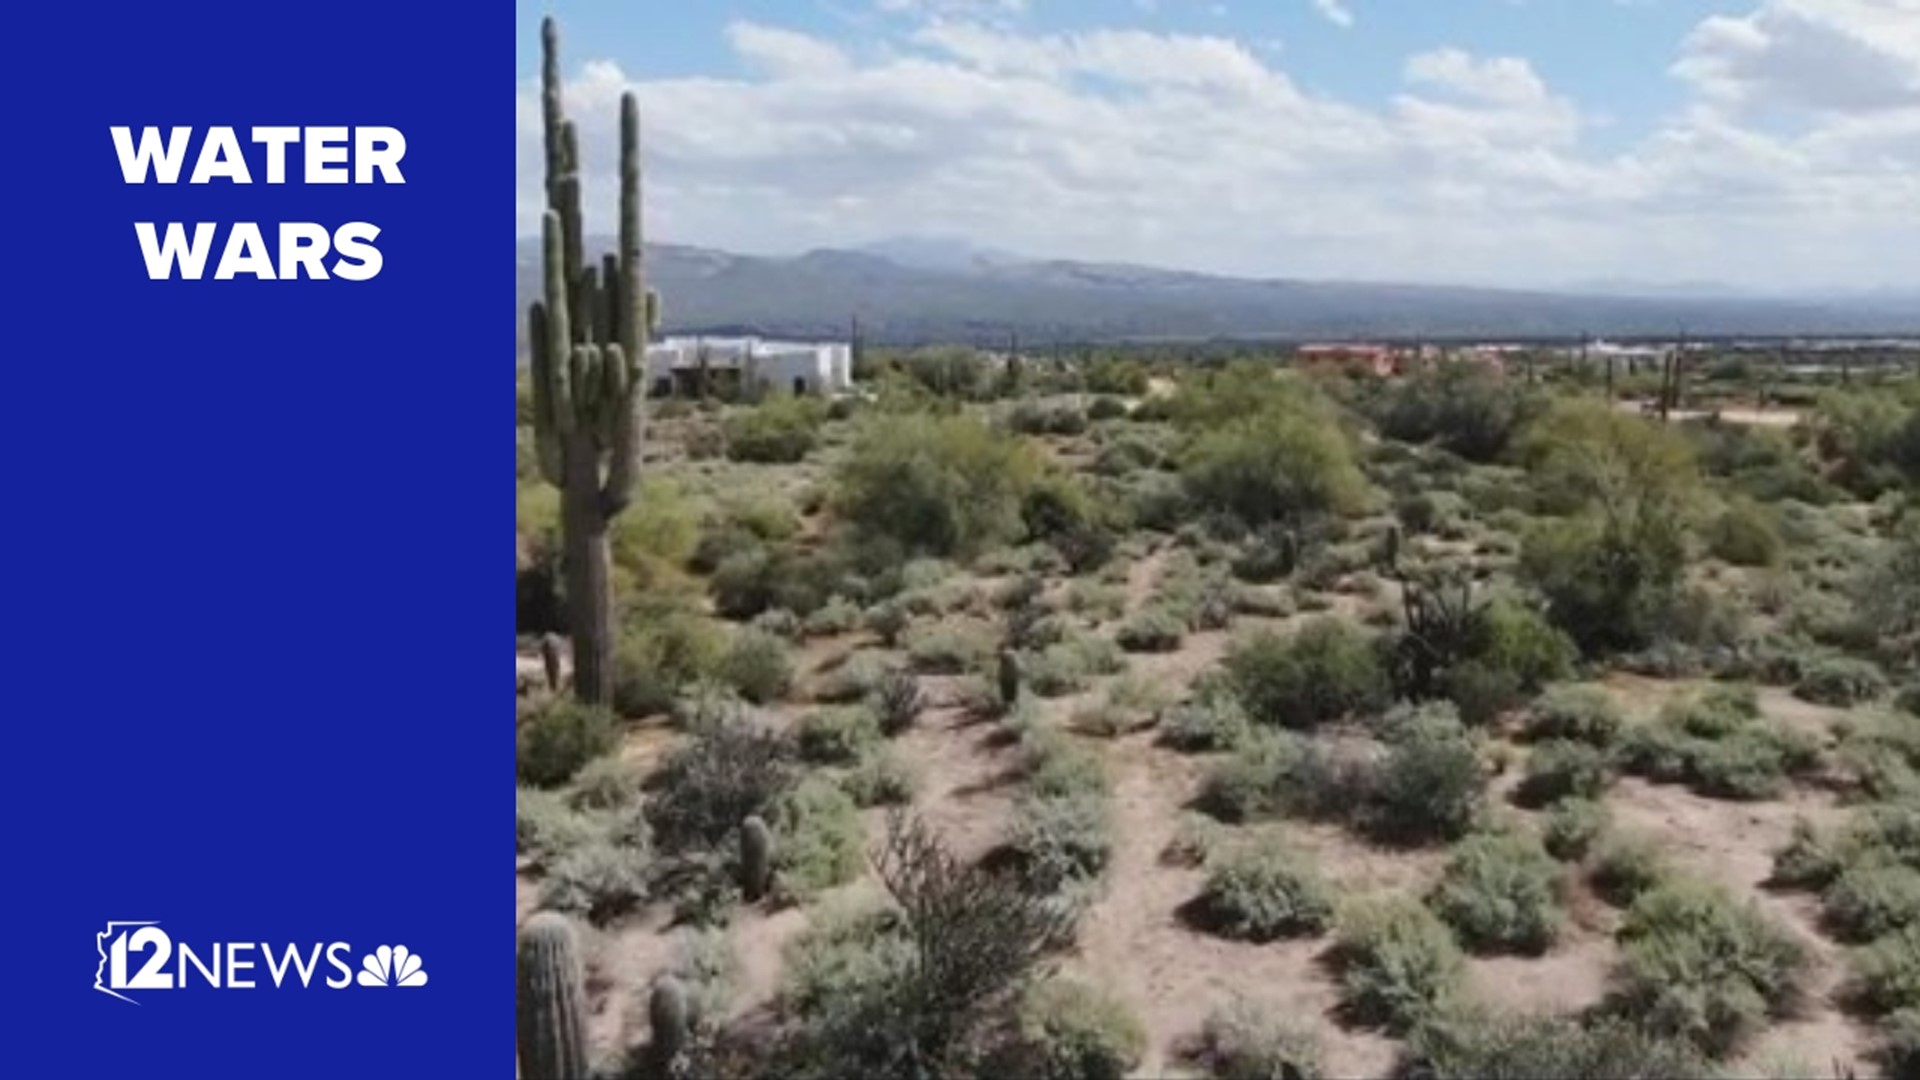 500 homes in the Rio Verde Foothills area will lose access to Scottsdale water in 72 days. There's no plan.